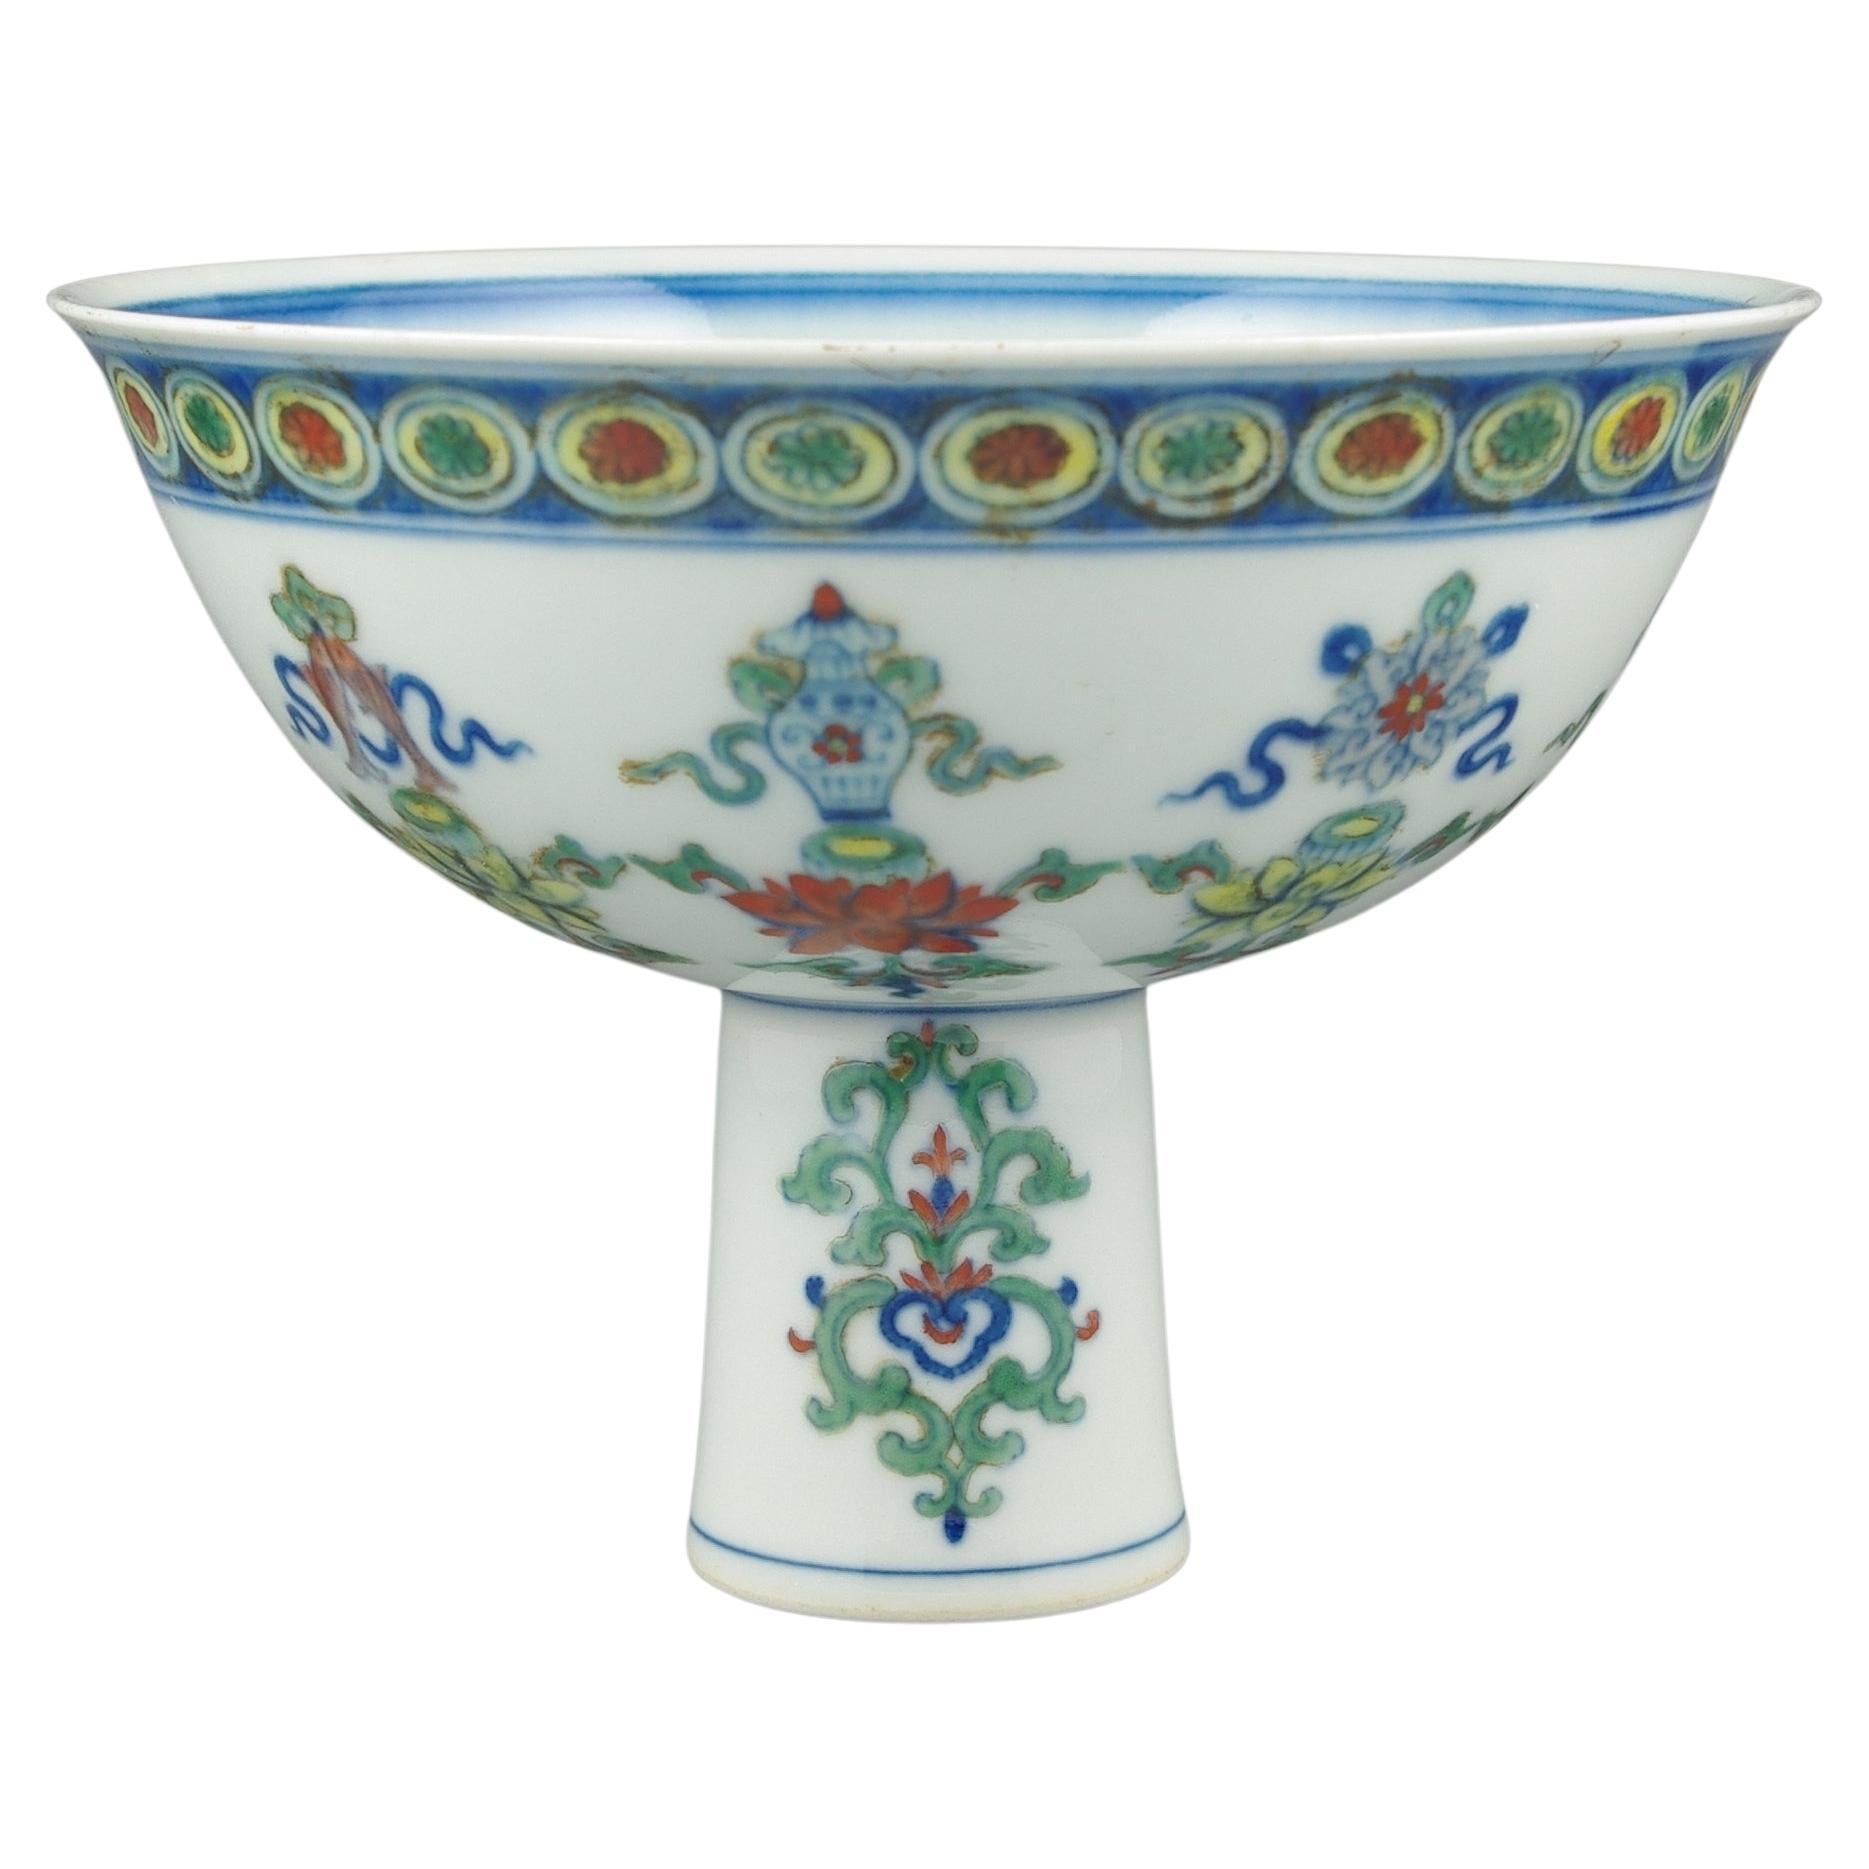 A rare and unique Chinese porcelain footed bowl, intricately adorned with underglaze blue and doucai techniques, showcases the revered eight Buddhist treasures on its exterior. The interior presents a harmonious design, featuring a double circle